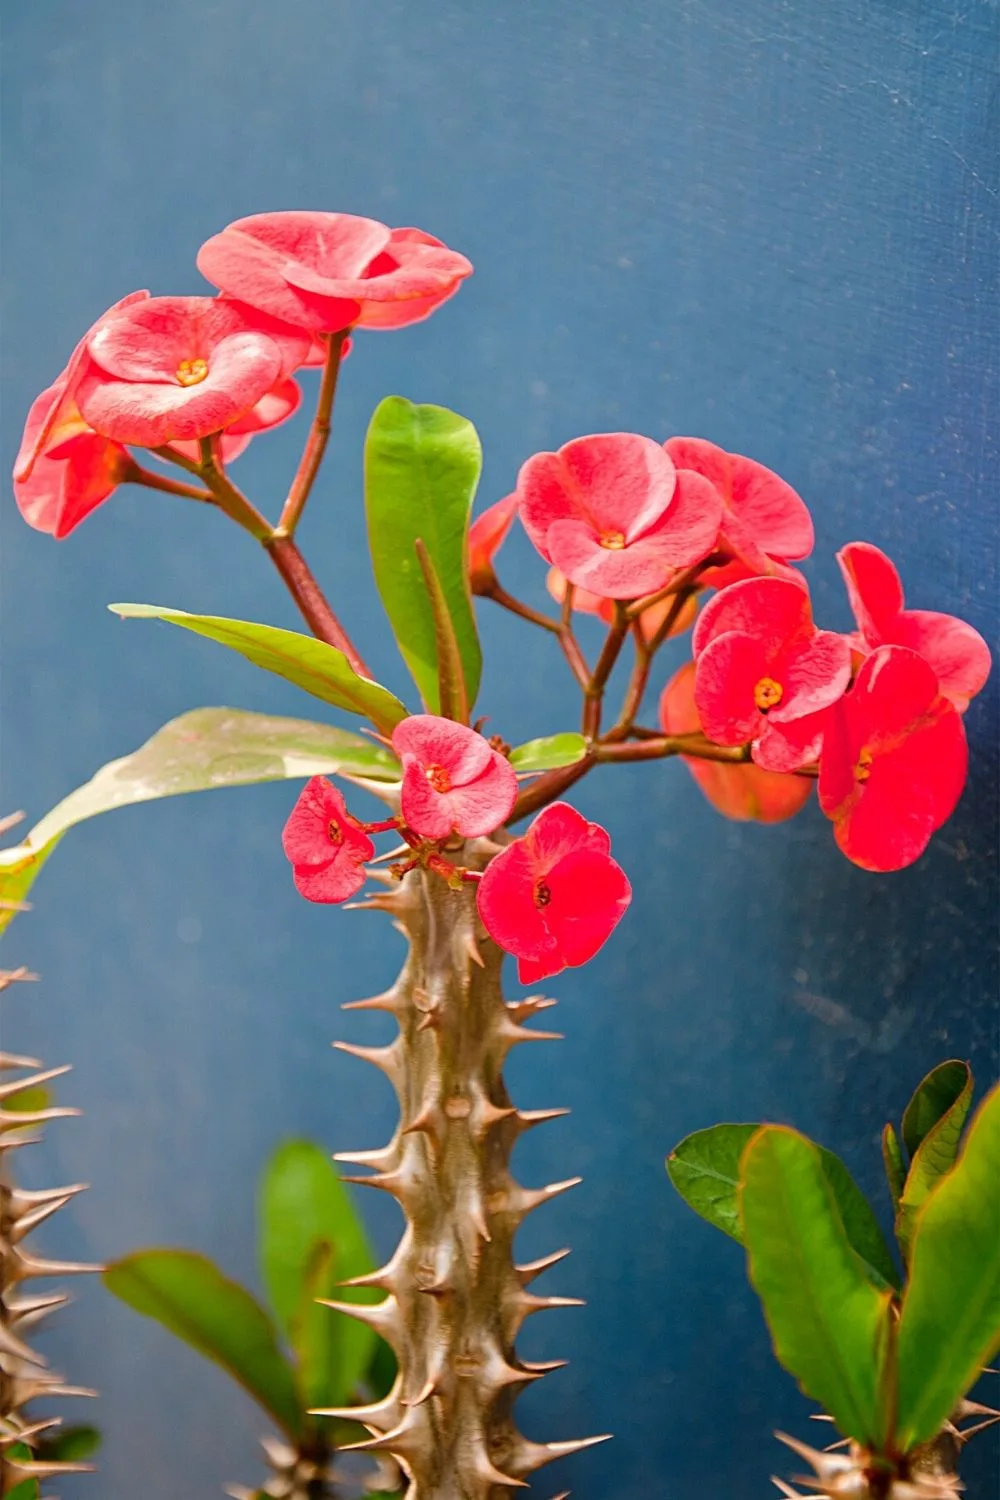 Euphorbia is another flowering plant that you can grow on your west-facing balcony